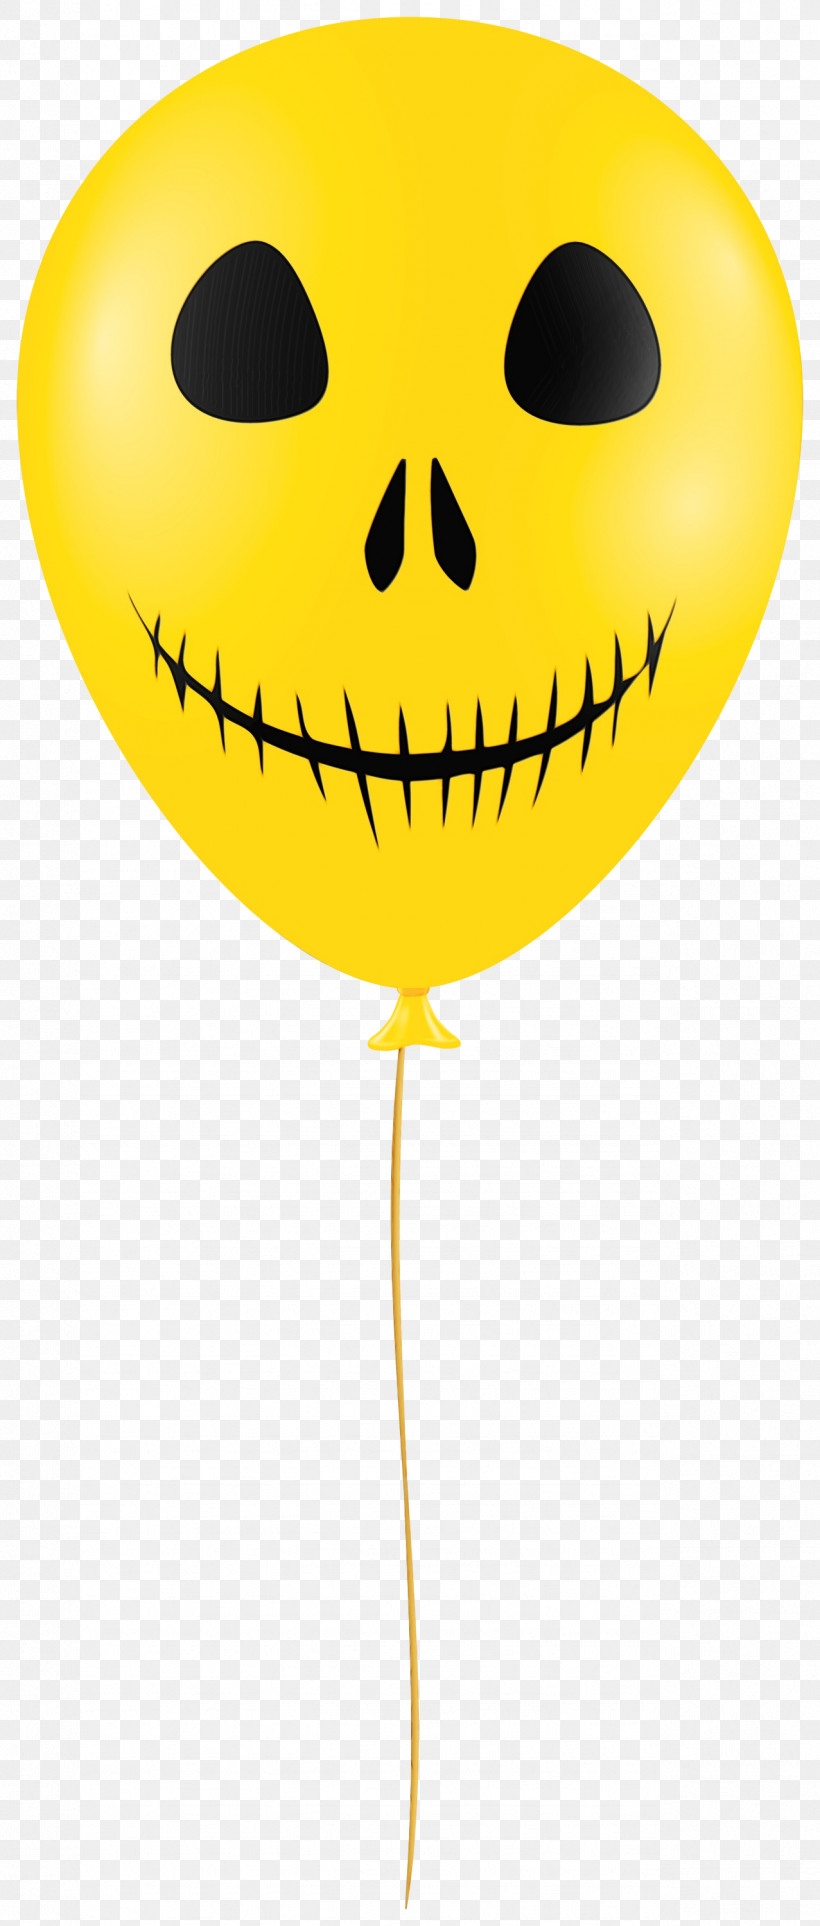 Balloon Halloween Balloon (5 Pieces) J&s Costume Birthday Silhouette, PNG, 1277x3000px, Watercolor, Balloon, Birthday, Costume, Line Art Download Free